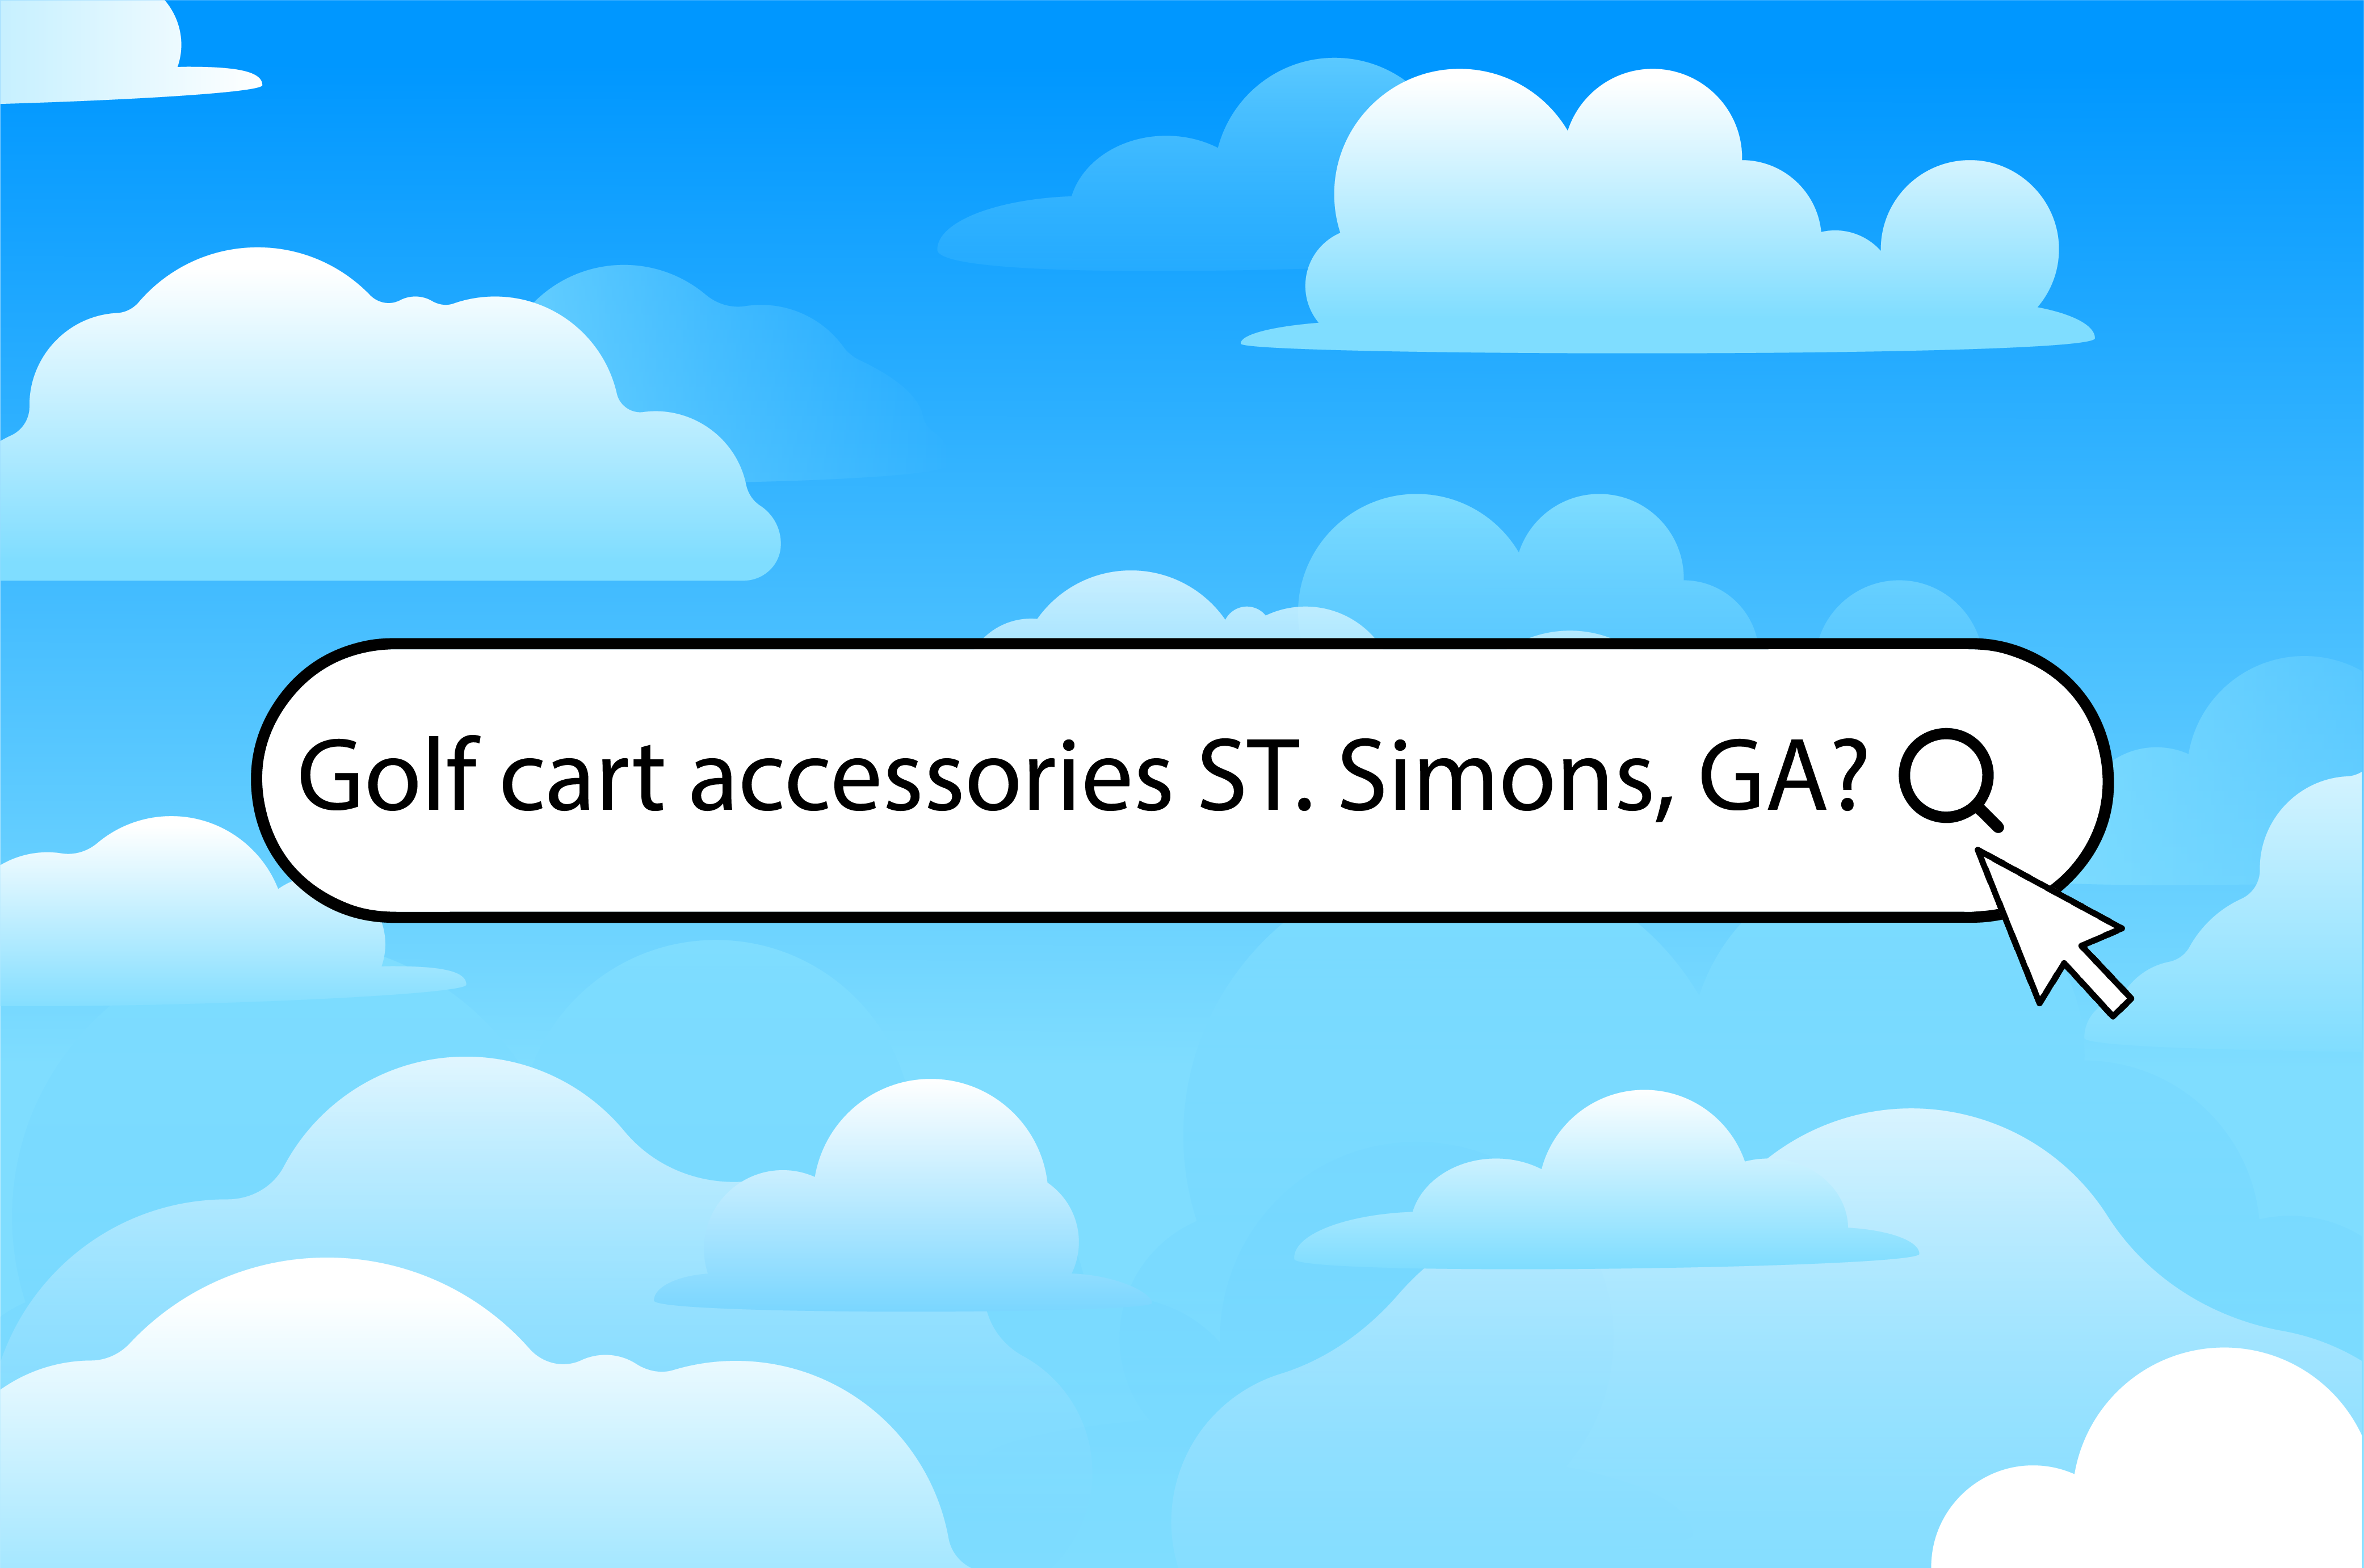 Three ways to find golf cart accessories in St. Simons, GA